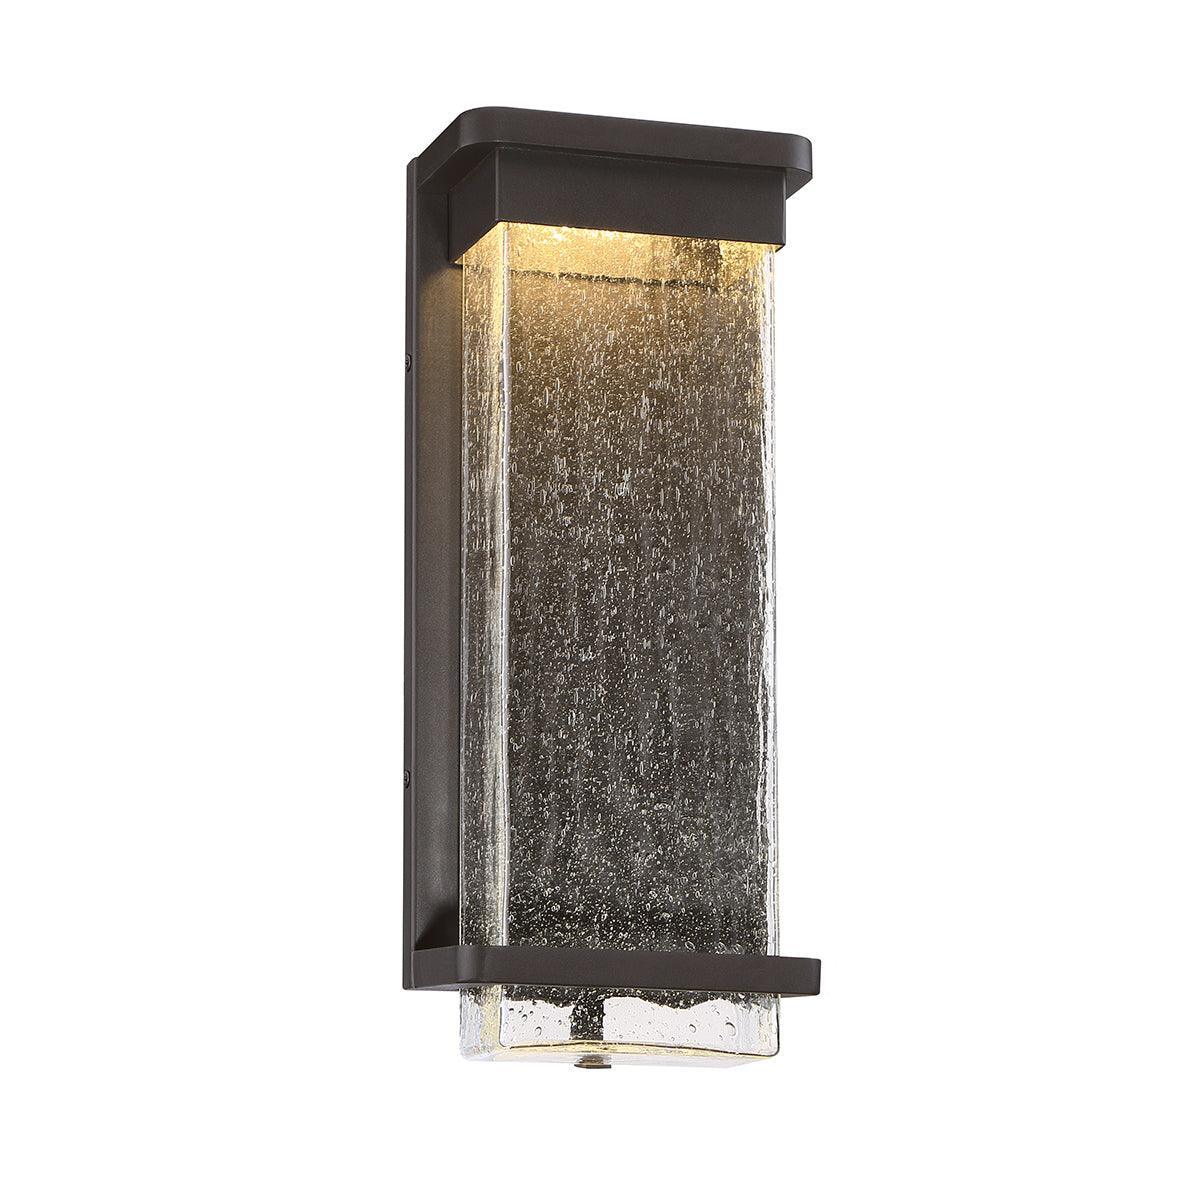 Modern Forms - Vitrine LED Outdoor Wall Mount - WS-W32516-BZ | Montreal Lighting & Hardware